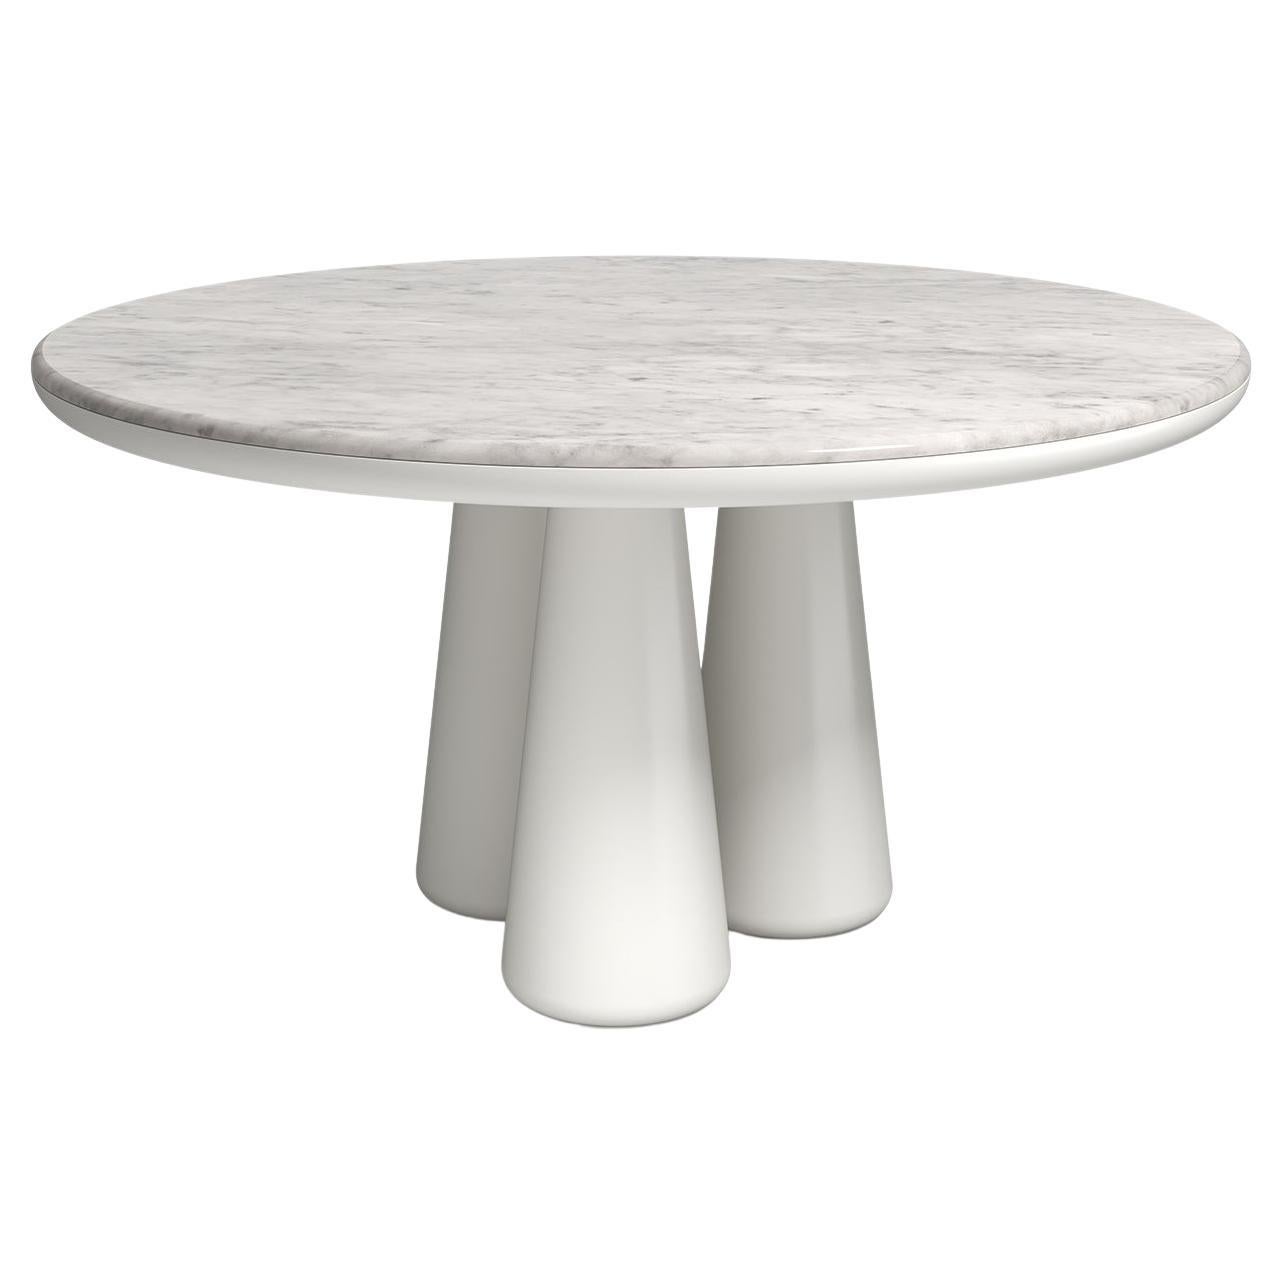 Isotopo table design by Elena Salmistraro, product by Scapin Collezioni
Limited Edition

A vibrant round top is combined with a sculptural base made of three rounded conical supports that give the product a strong